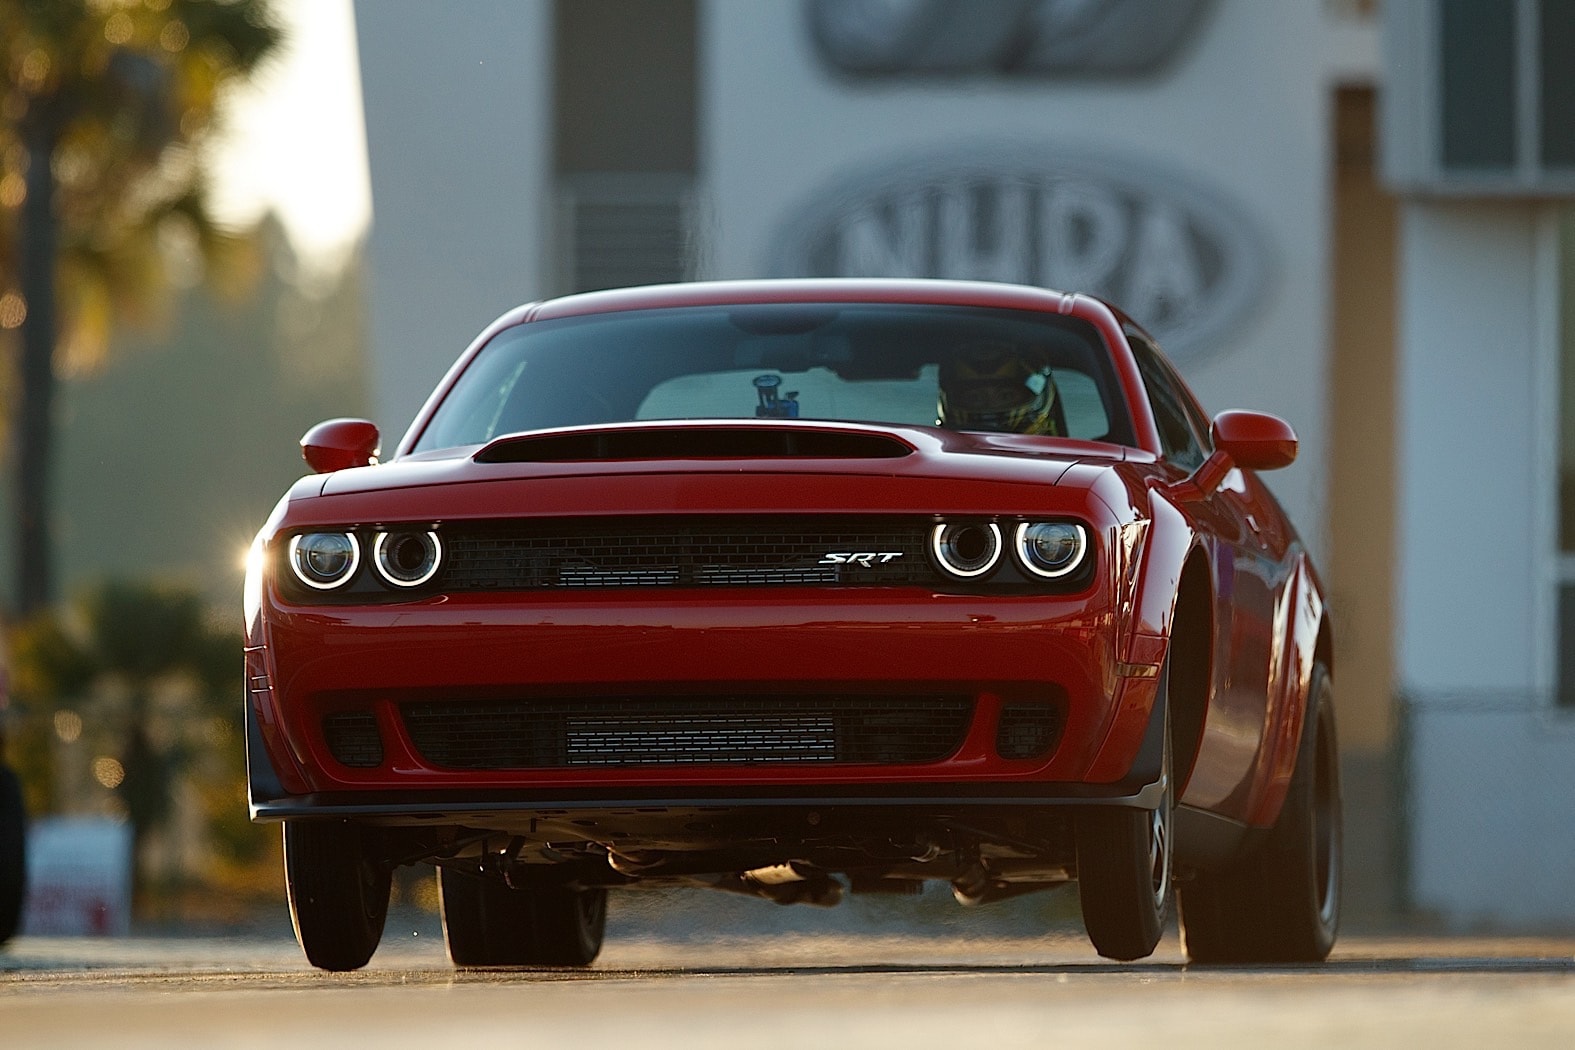 2018 Dodge Challenger Srt Demon Gets Official Pricing Its A Pretty Good Steal Autoevolution 